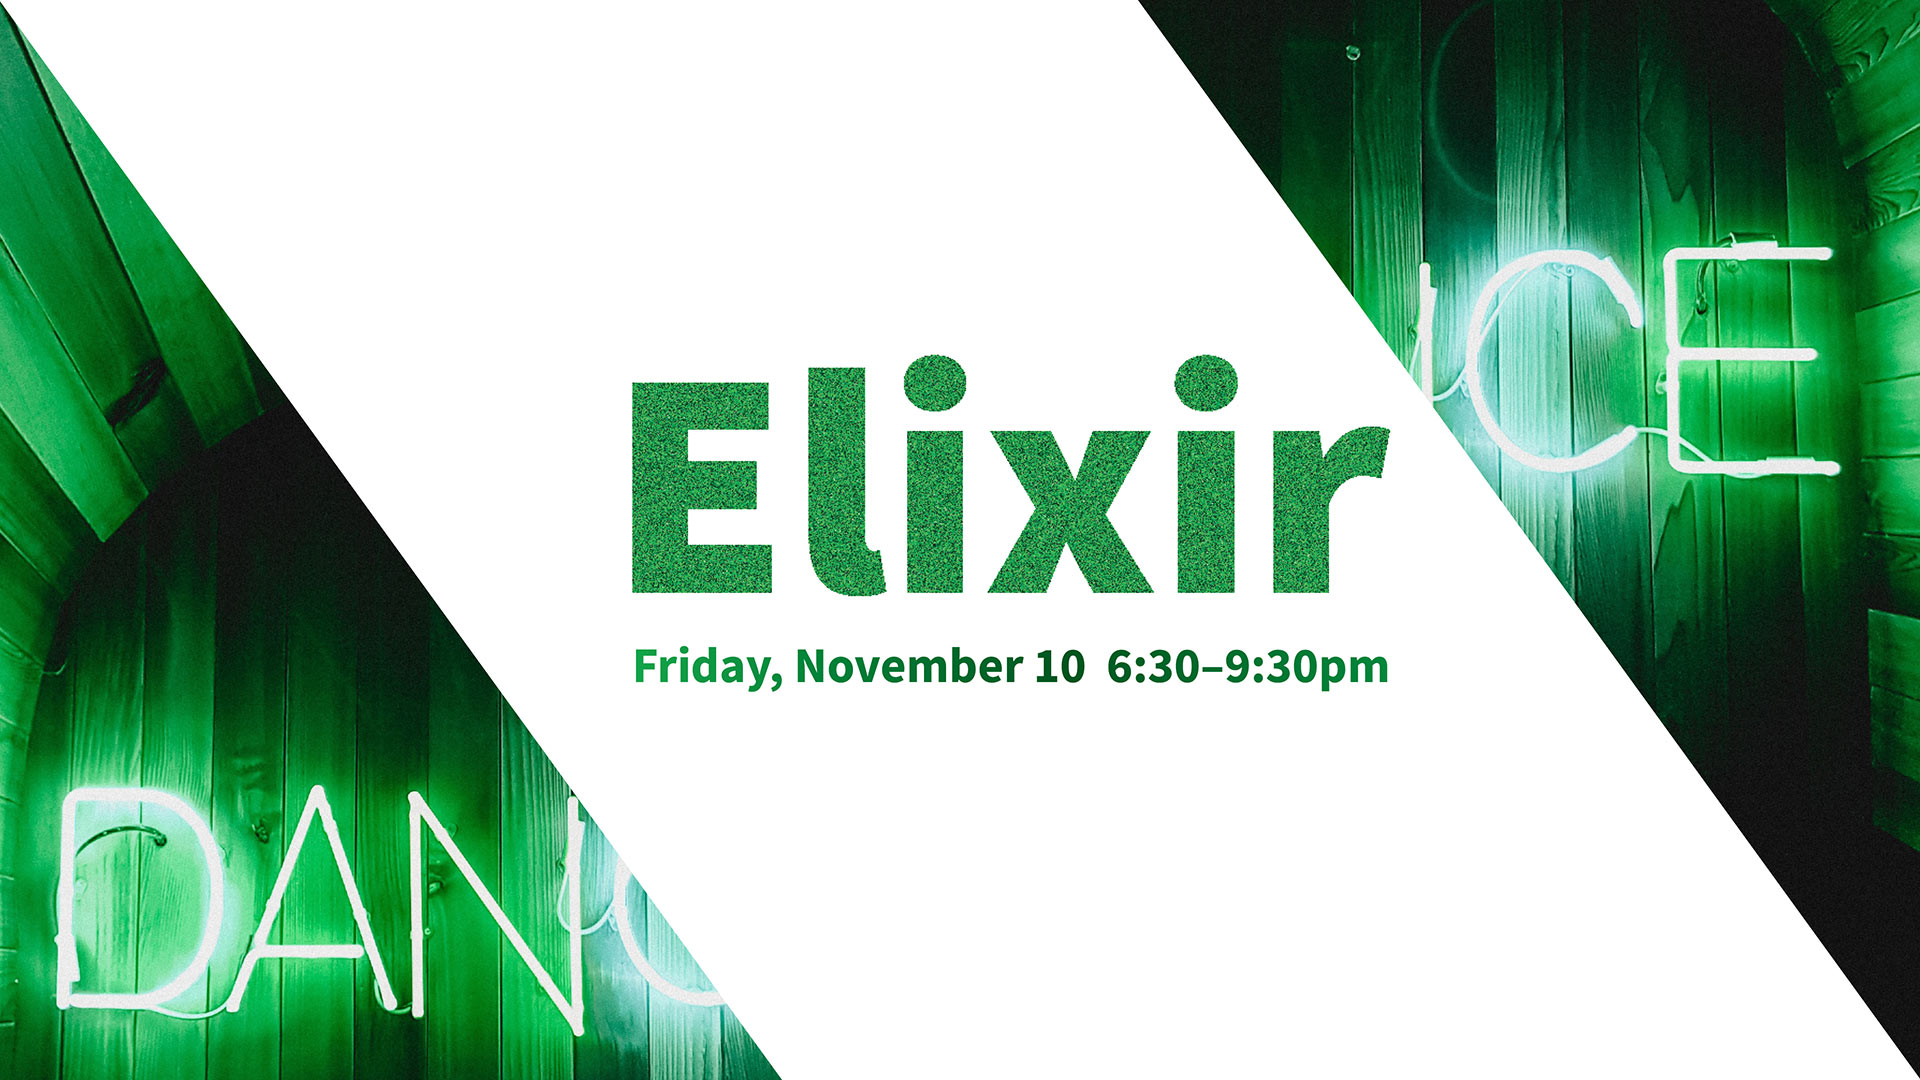 Elixir text with event date on a split graphic background of a neon sign that says Dance